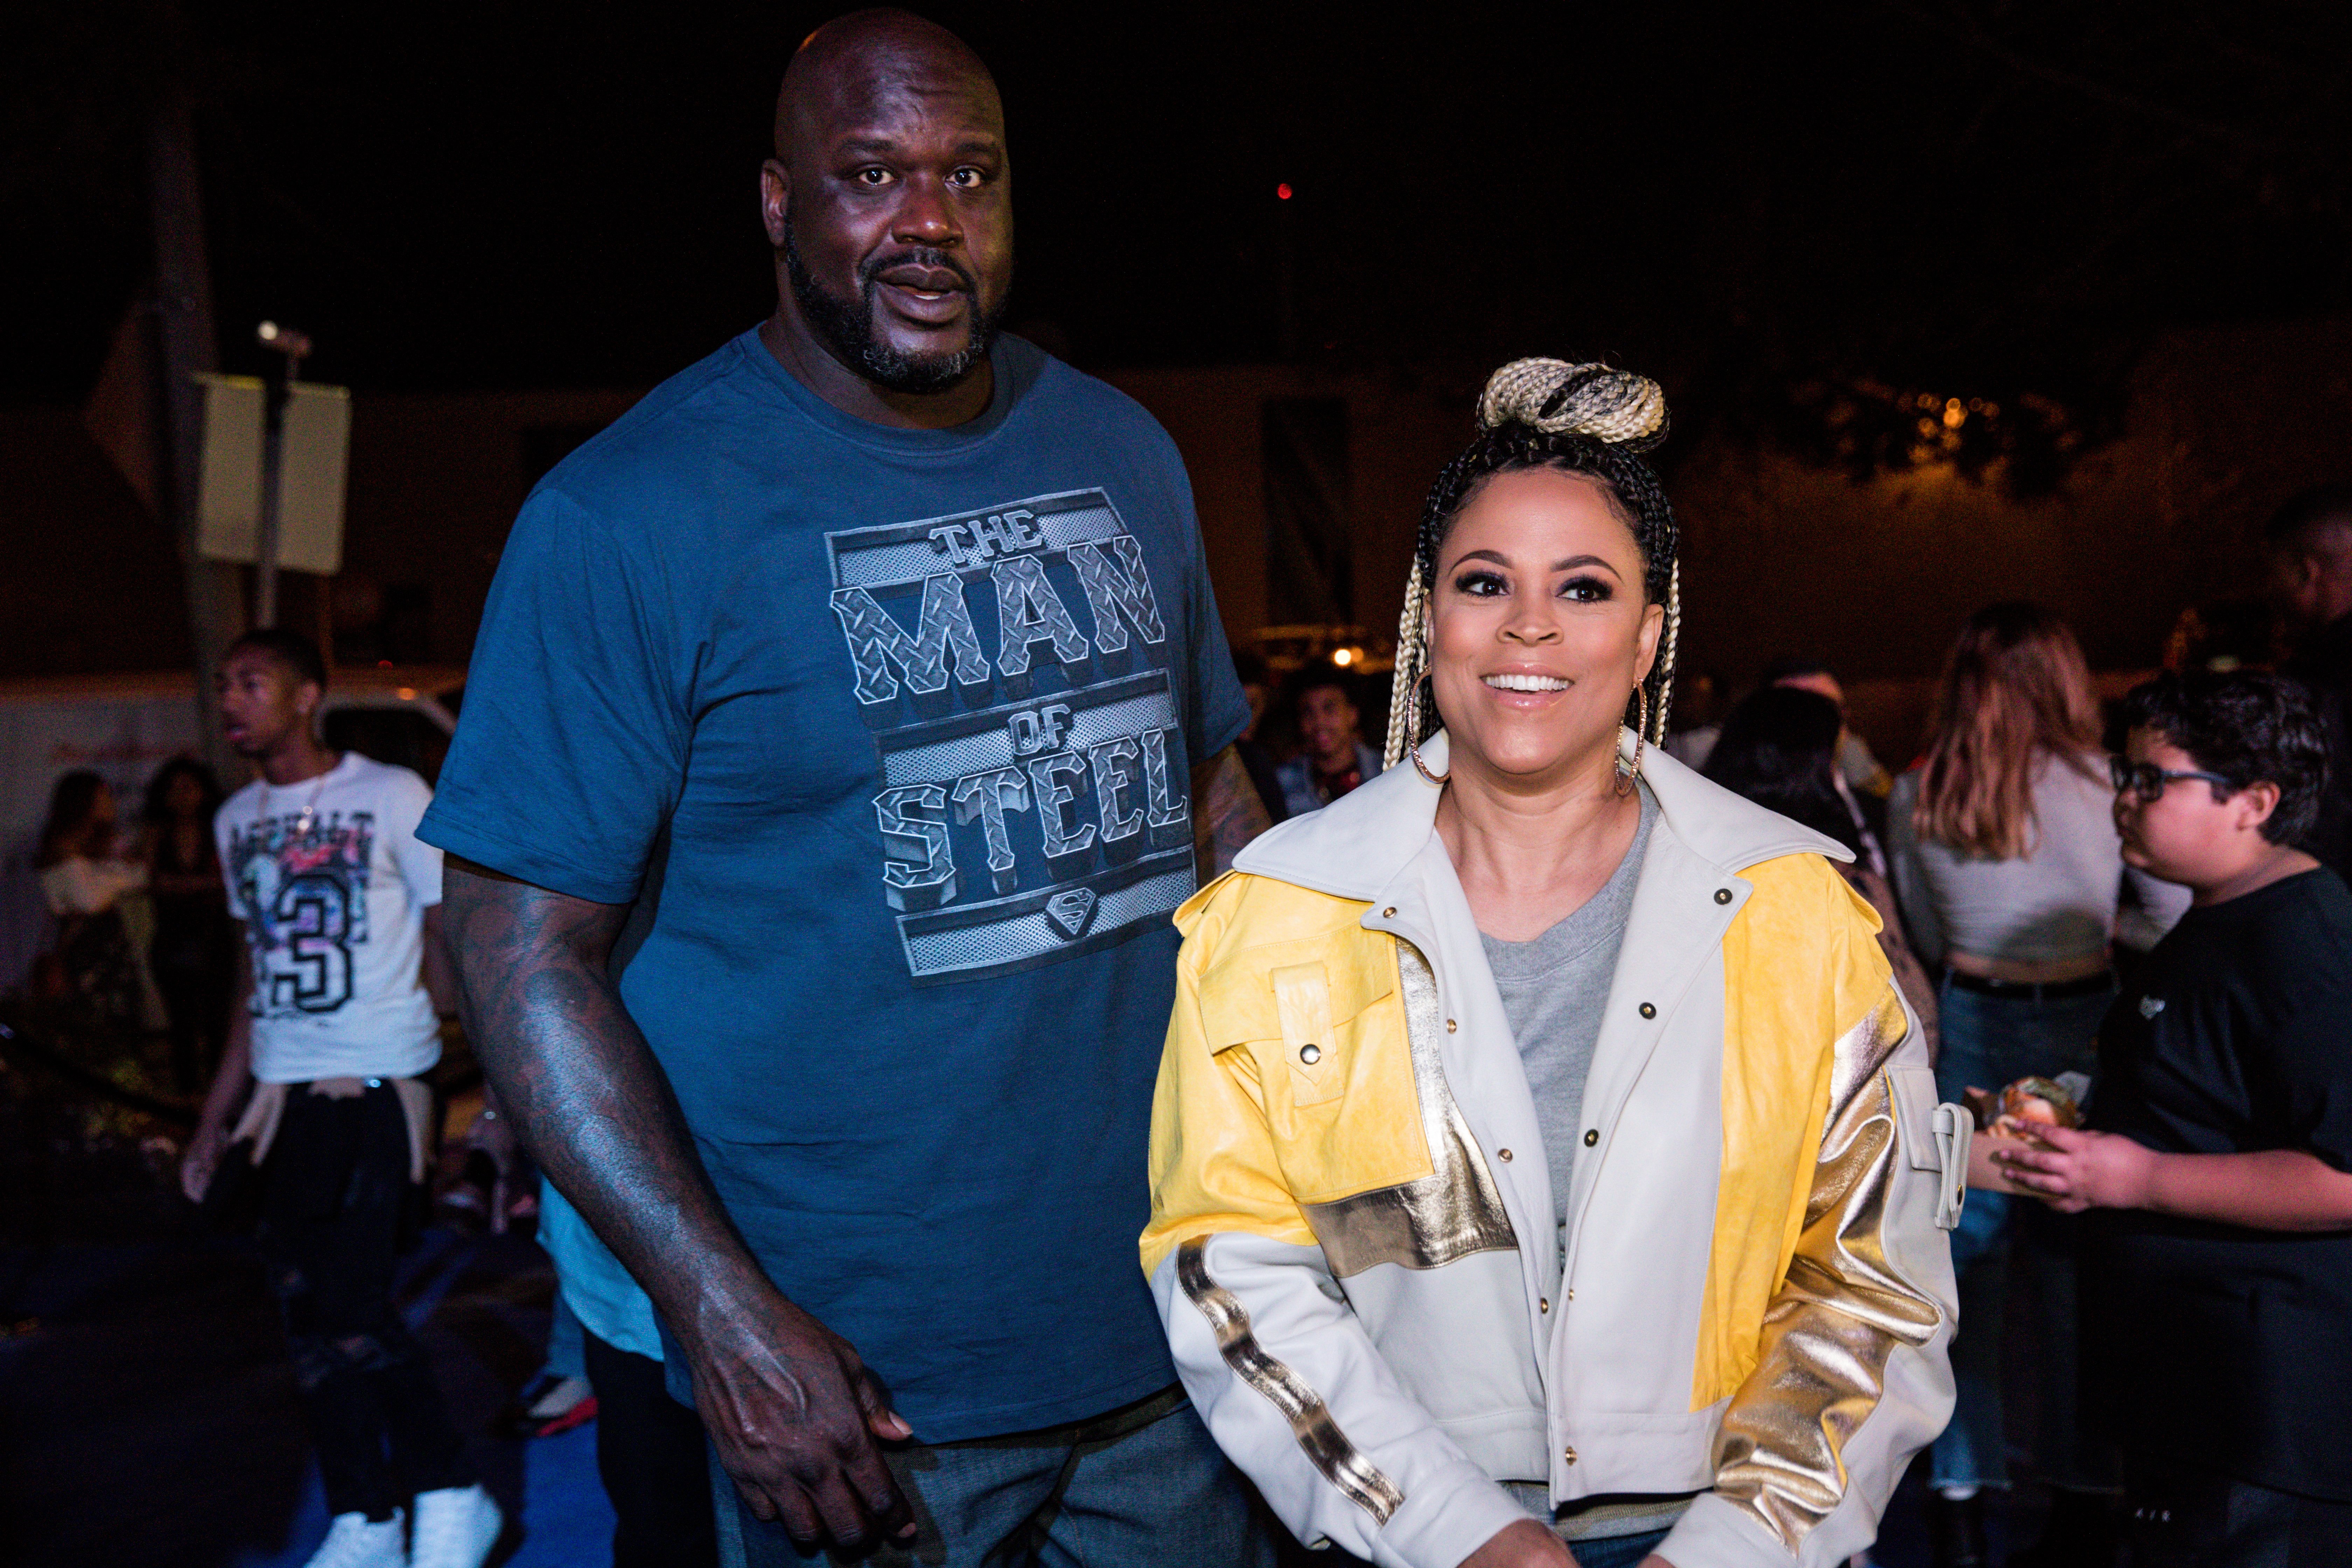  Shaunie O'Neal and Shaquille O'Neal celebrate Shareef O'Neal's 18th birthday party at West Coast Customs on January 13, 2018 in Burbank, California. | Source: Getty Images